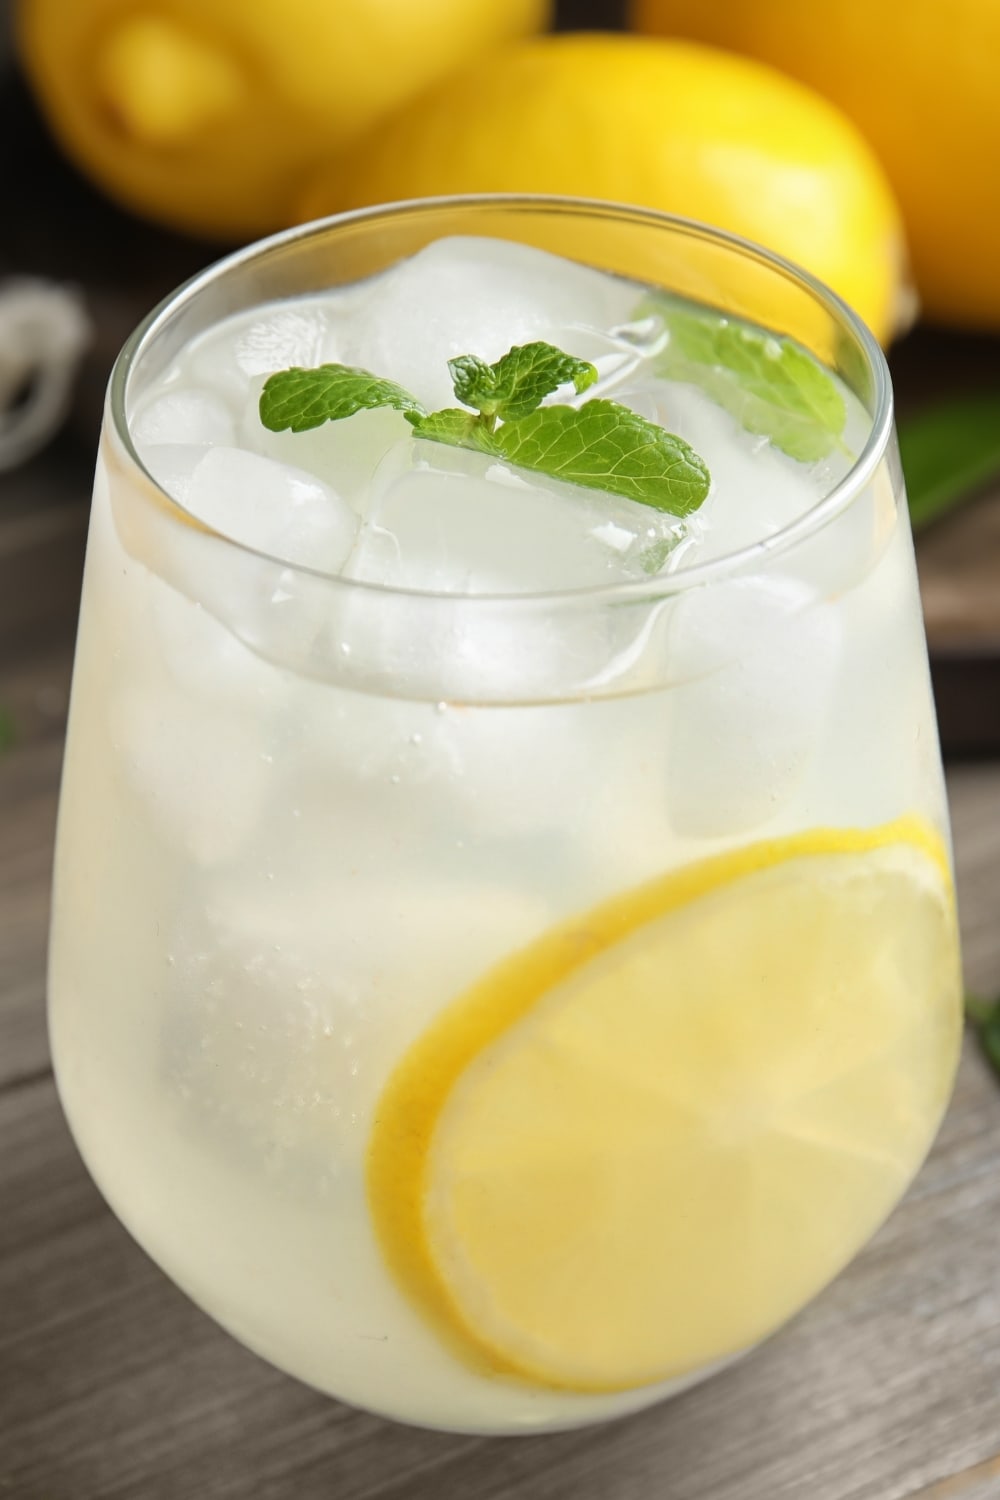 Glass of lemonade with ice. slice lemon and mint leaves on top